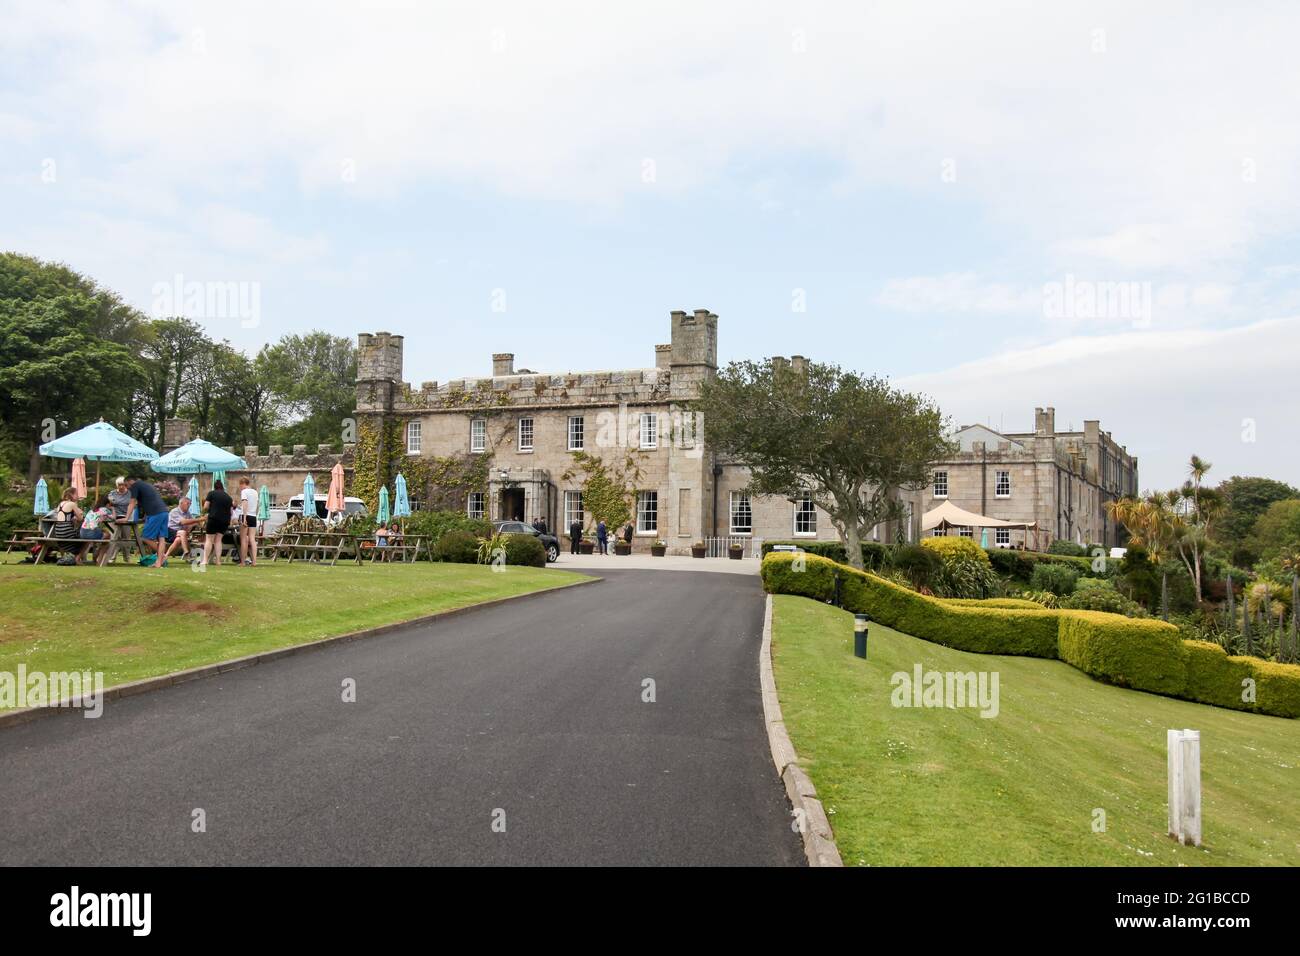 Driveway and entrance to Tregenna Castle Resort ahead of the G7 summit in Carbis Bay, St. Ives, Cornwall, UK, June 2021 Stock Photo